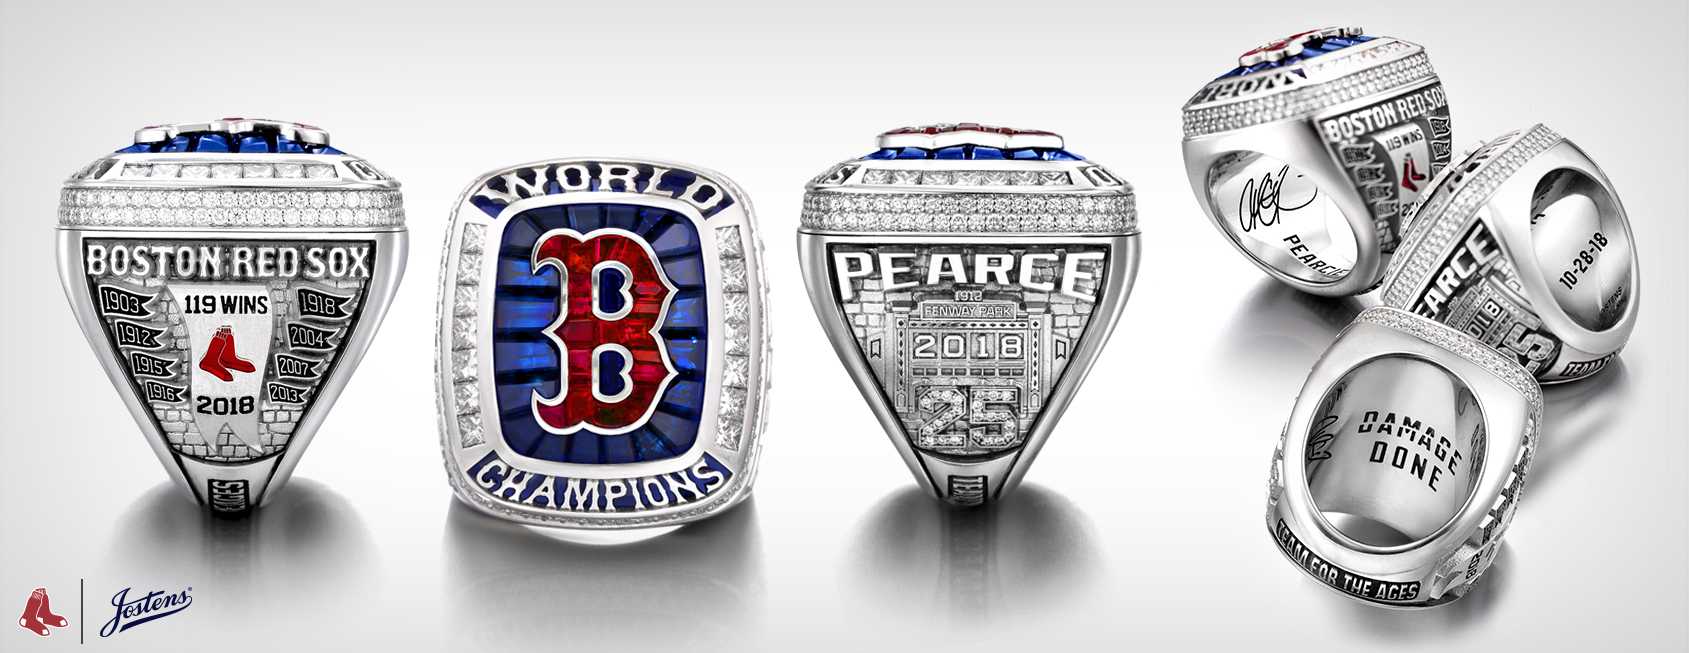 New show features Red Sox slugger Ortiz's World Series rings - The Boston  Globe